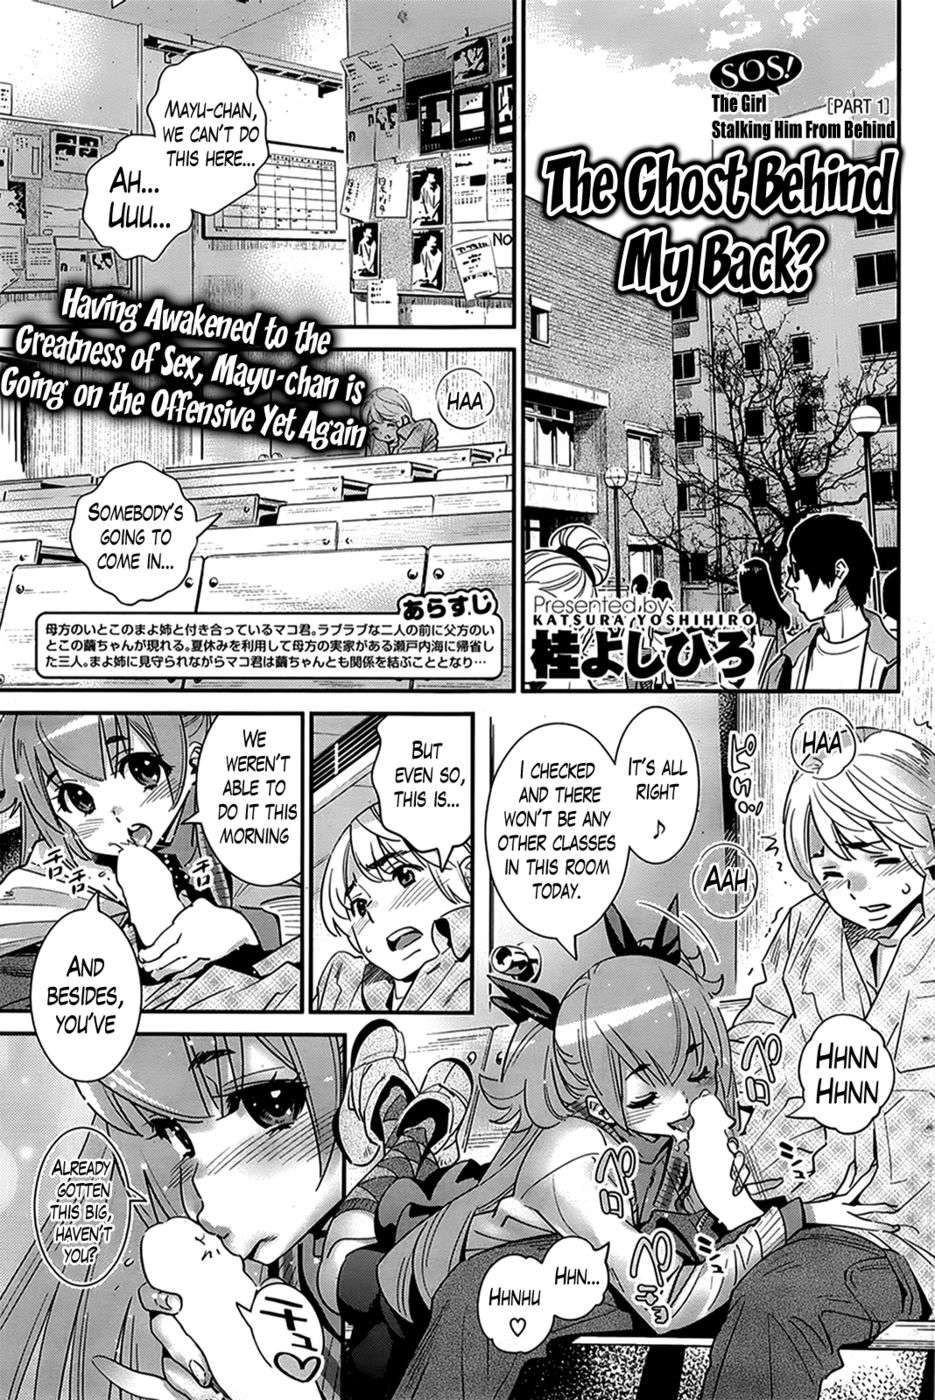 Hentai Manga Comic-The Ghost Behind My Back ?-Chapter 8-The Girl Stalking Him From Behind-1